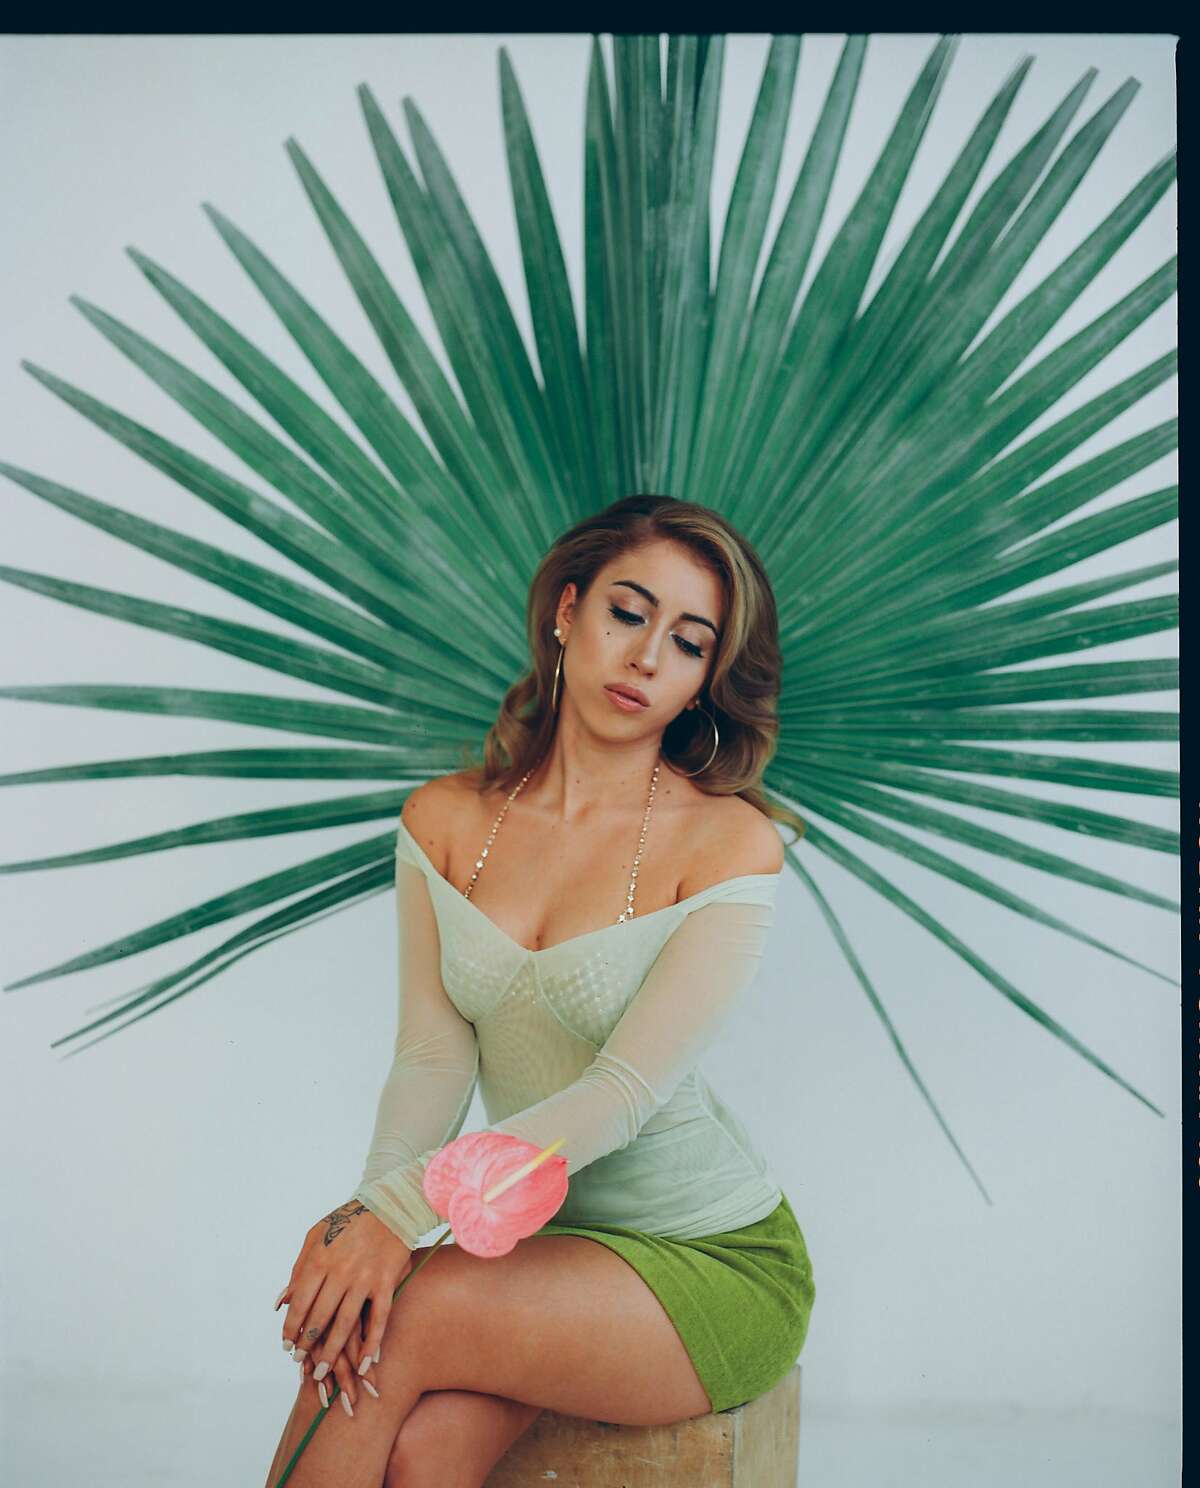 Kali Uchis is scheduled to perform at the New Parish in Oakland on Tuesday, Sept. 26.